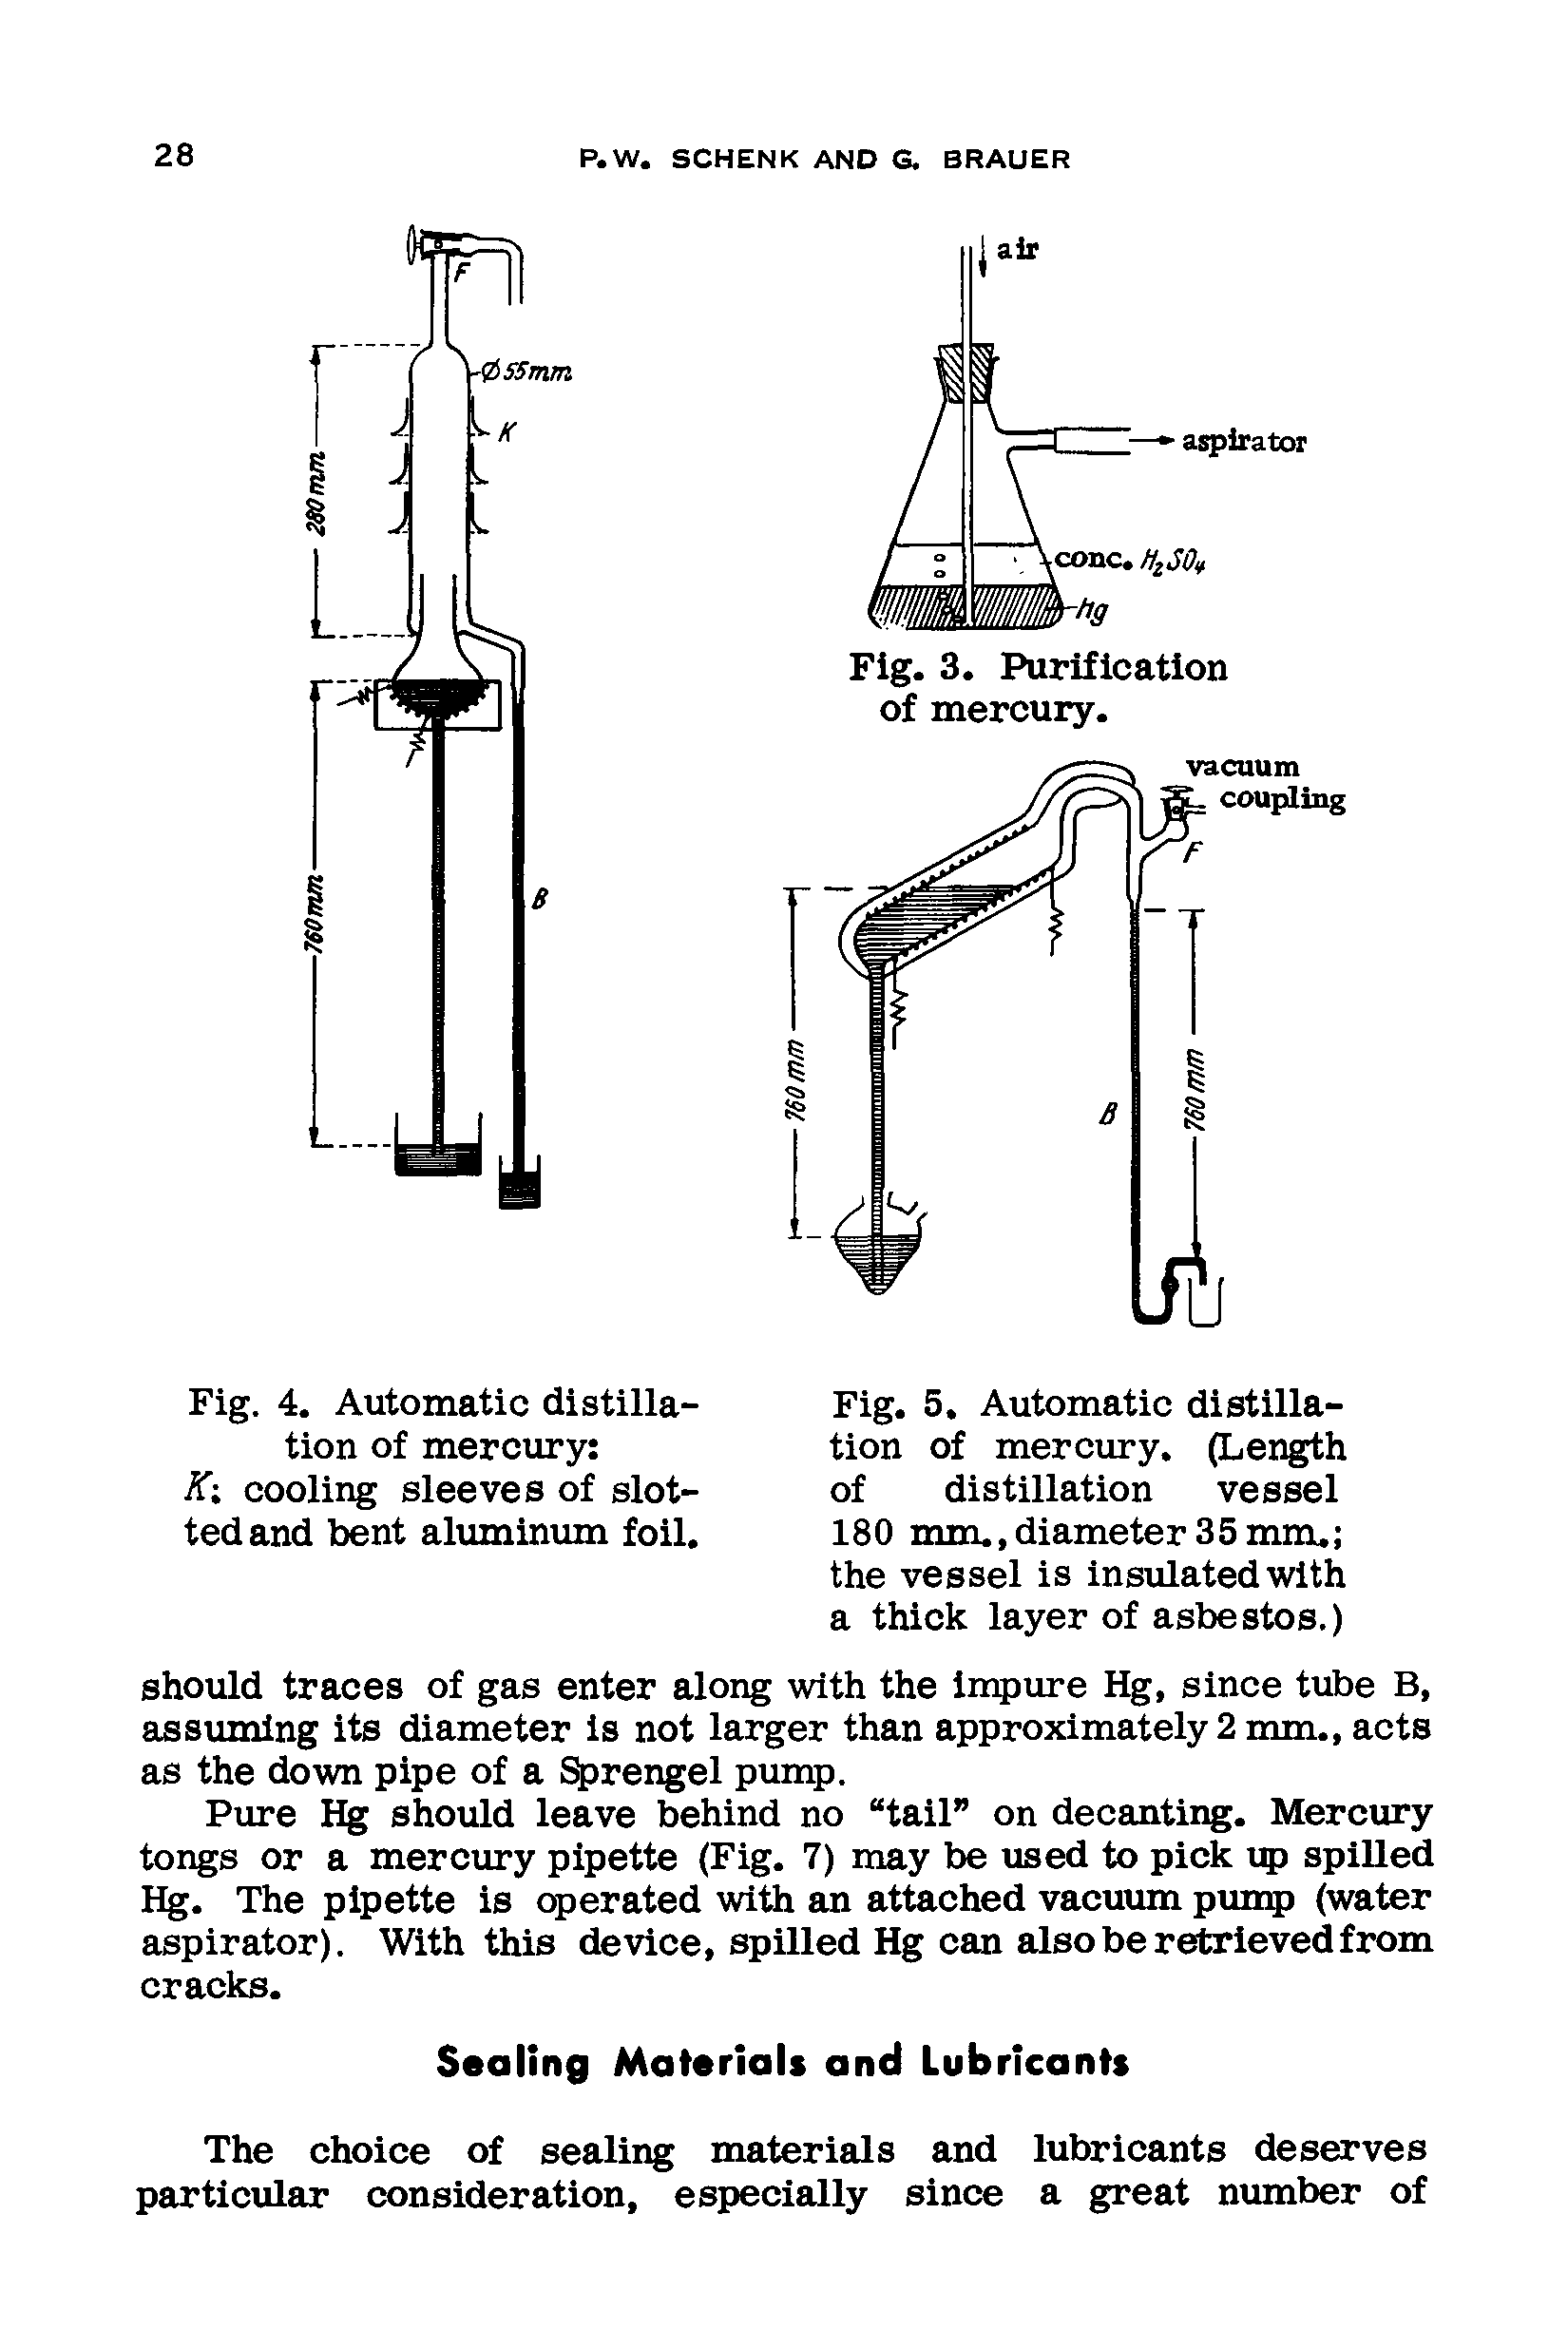 Fig. 5. Automatic distillation of mercury. (Length of distillation vessel 180 mm.,diameter 35mm. the vessel is insulated with a thick layer of asbestos.)...